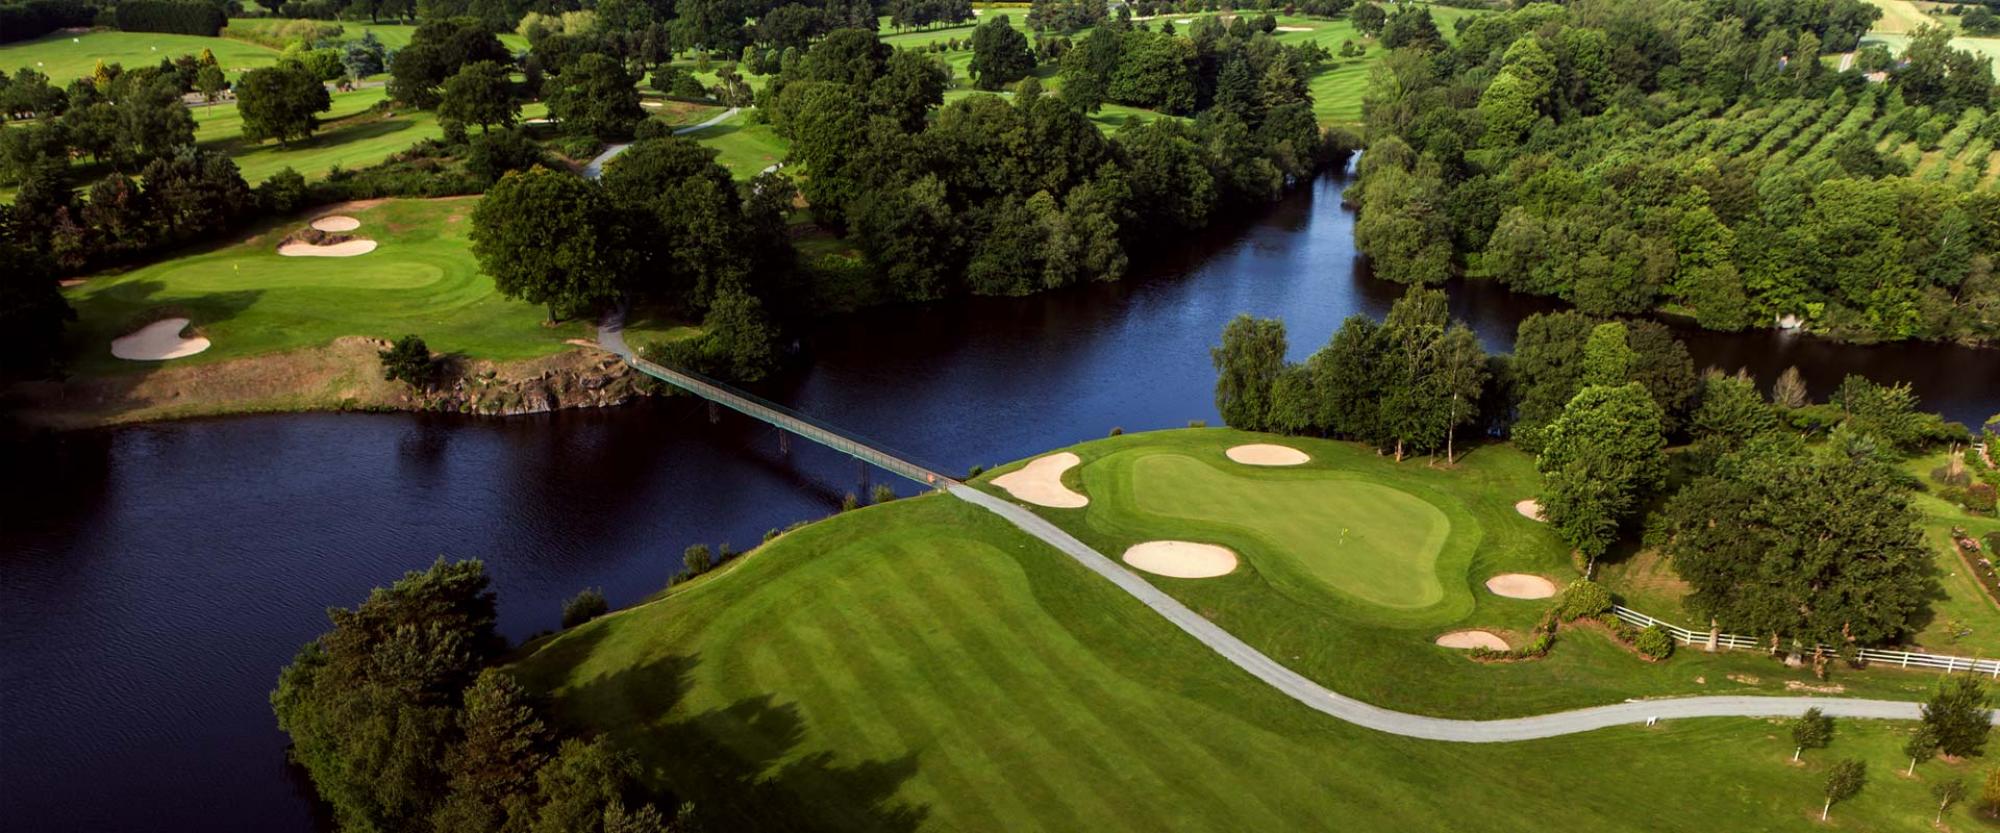 All The Saint-Malo Golf & Country Club's beautiful golf course within faultless Brittany.